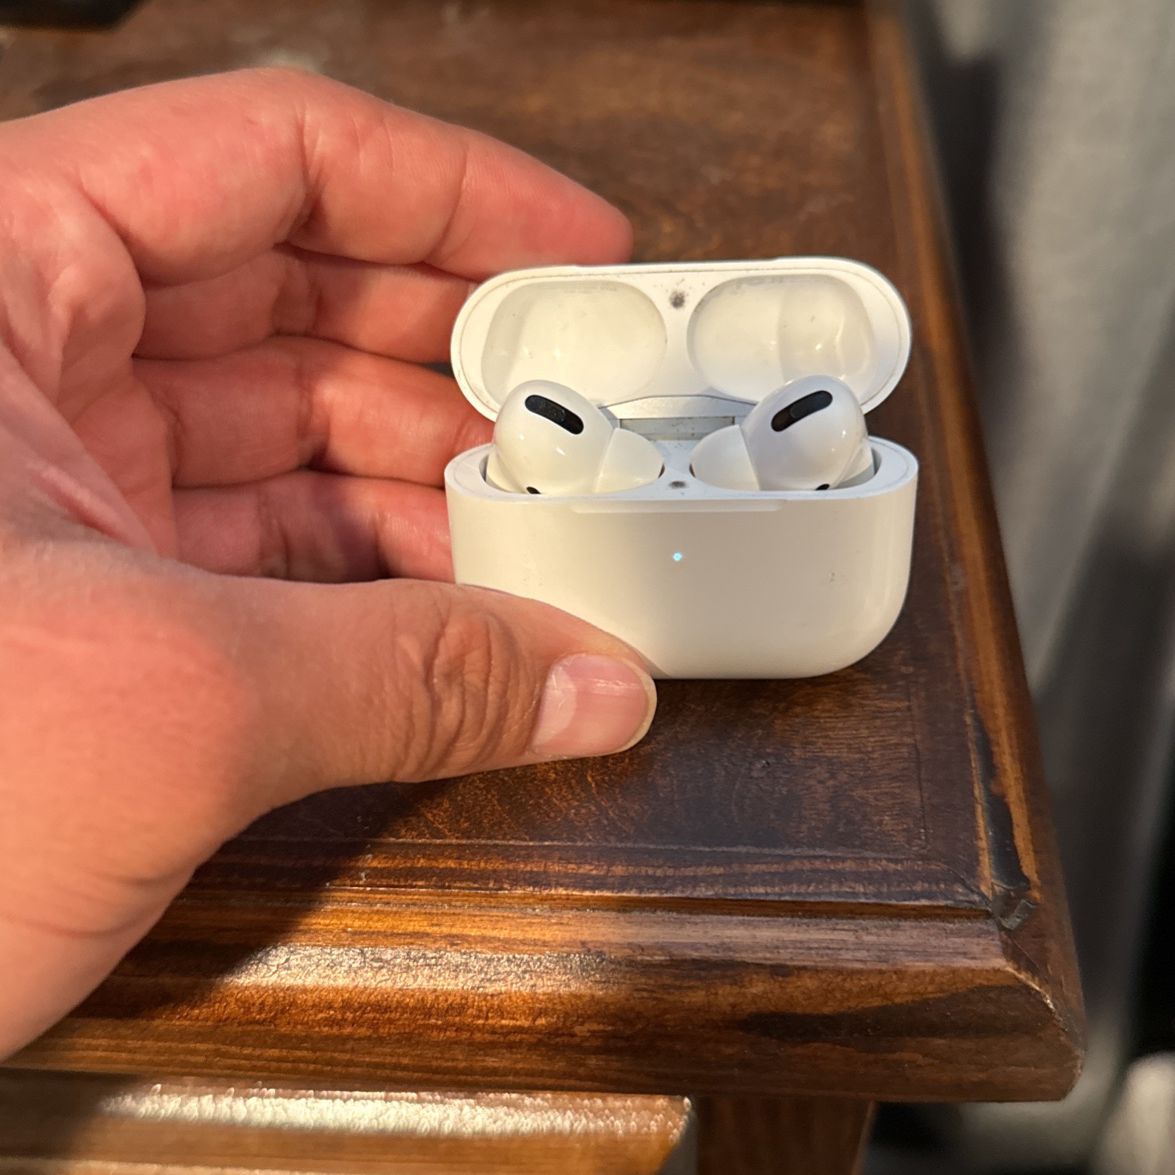 Apple AirPods Pro 1st Generation  For Sale Or Trade